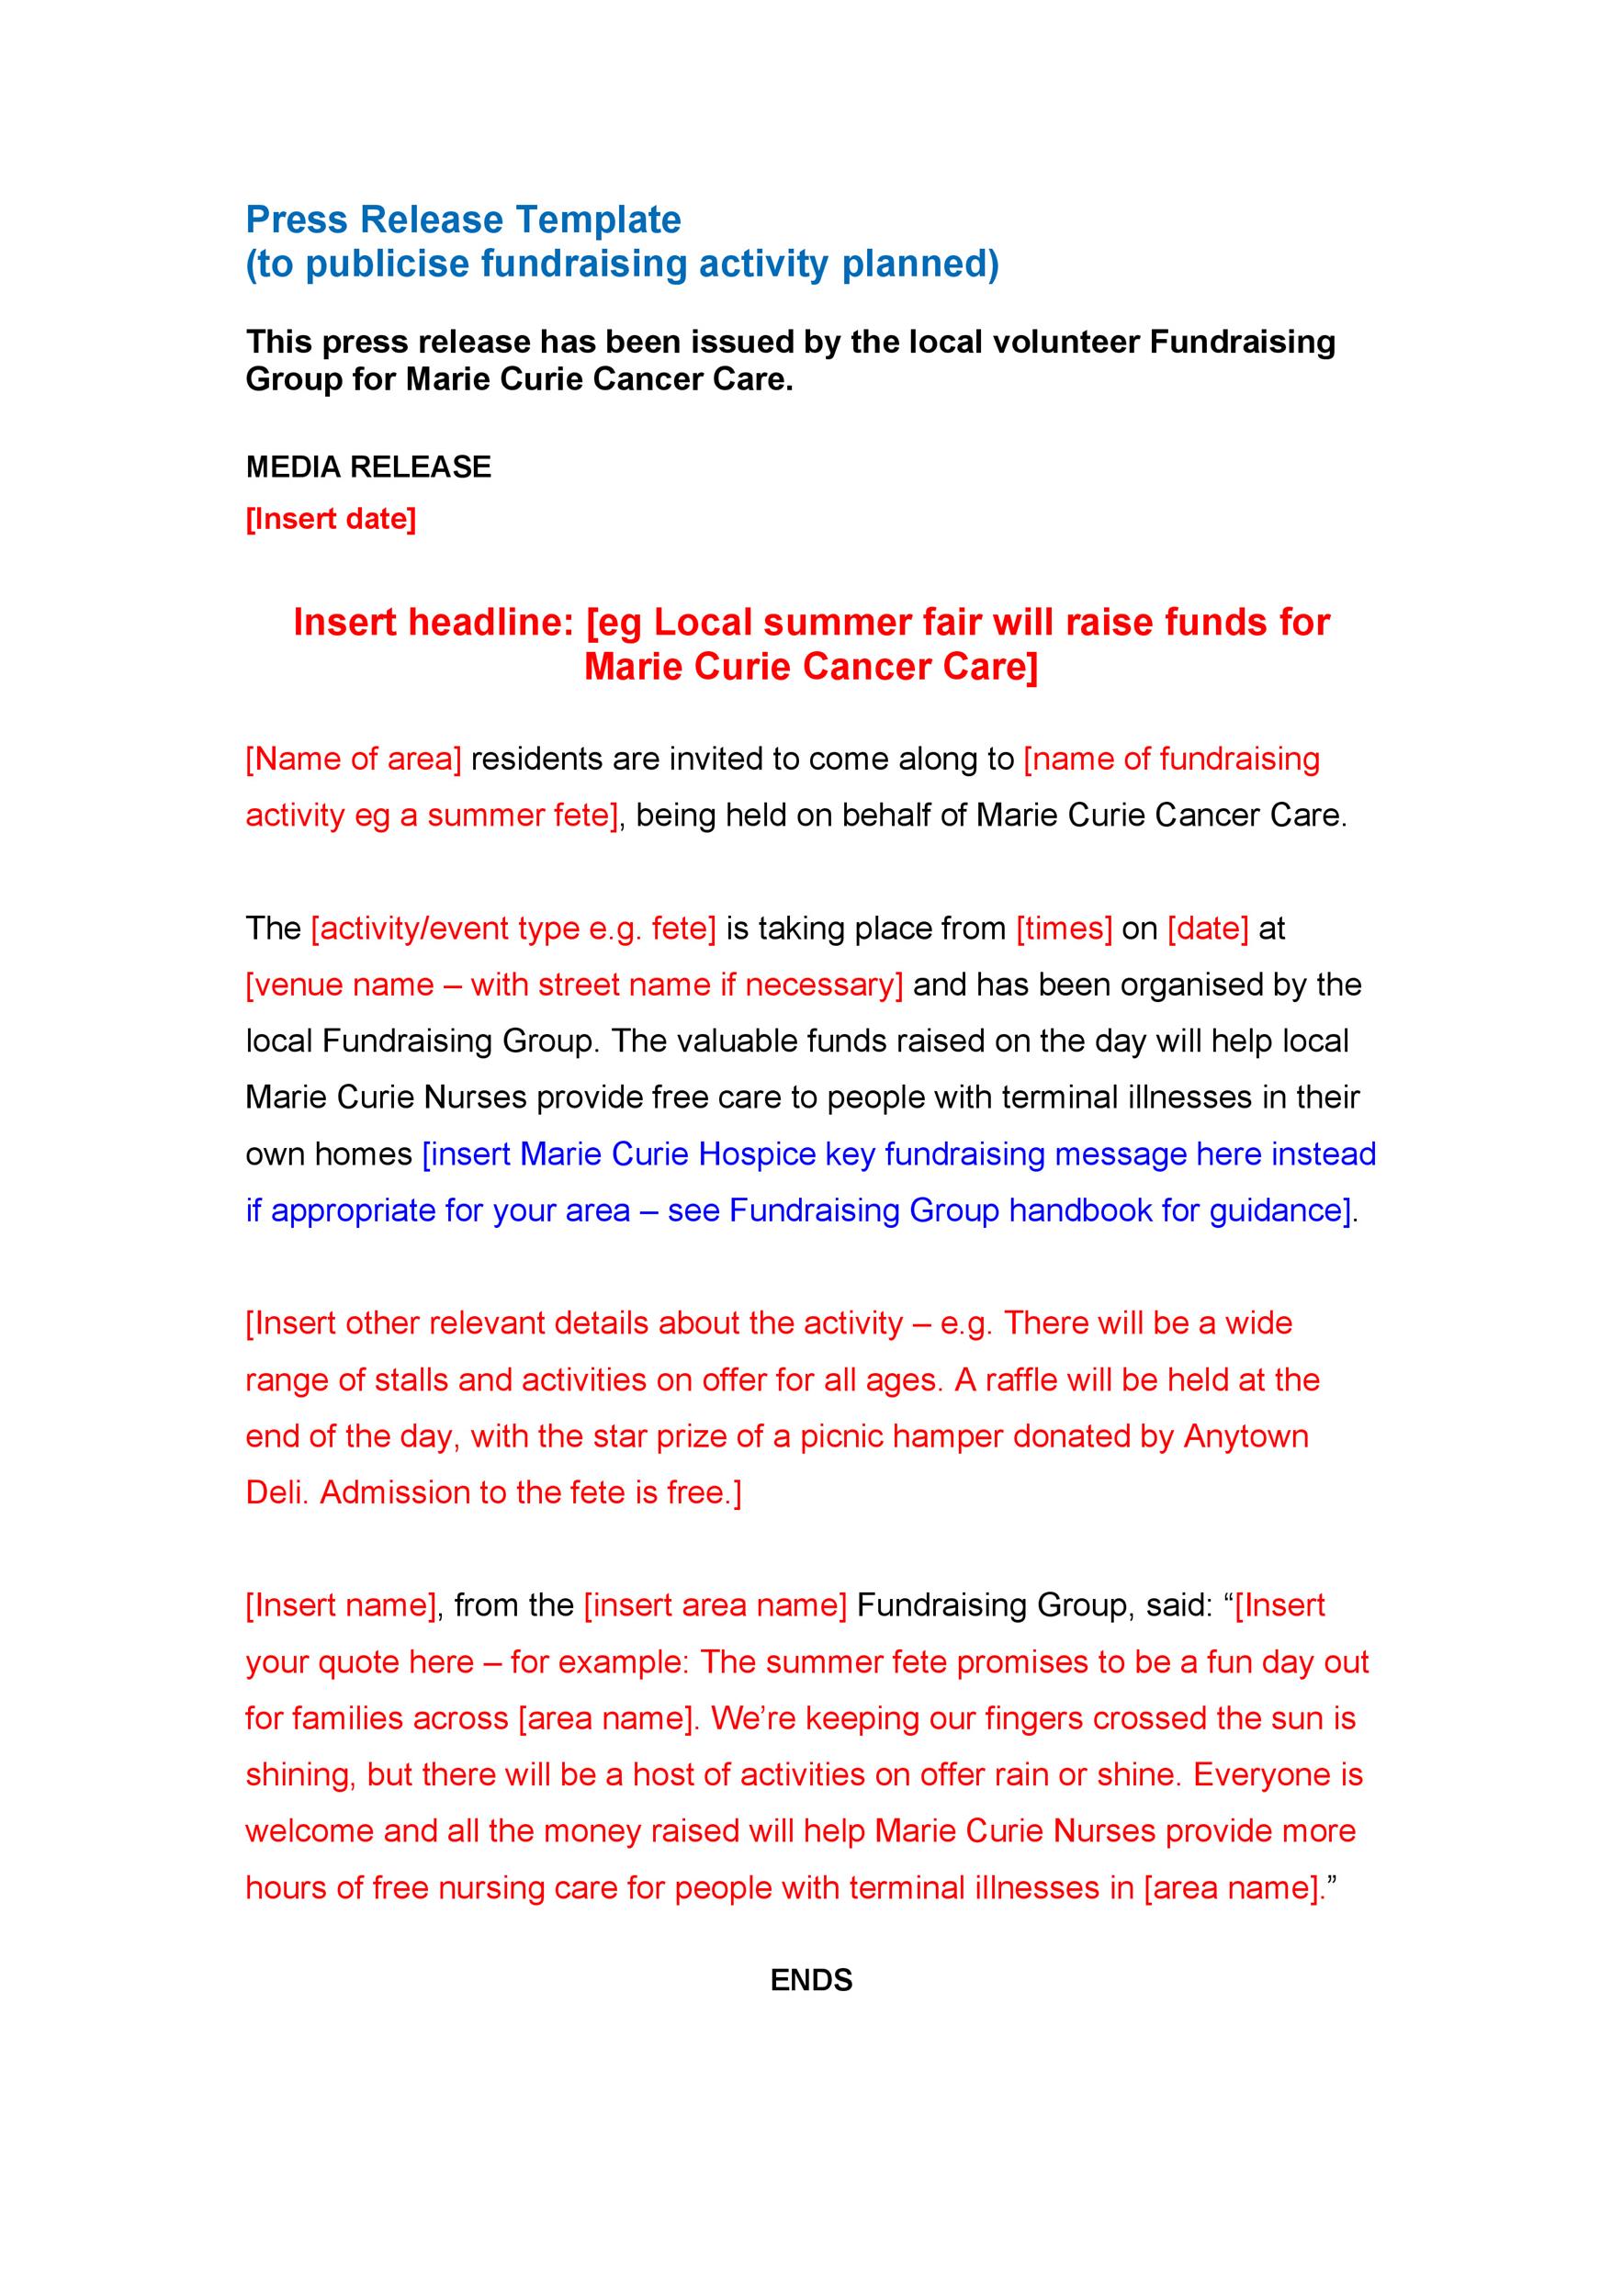 Free Press release template 43